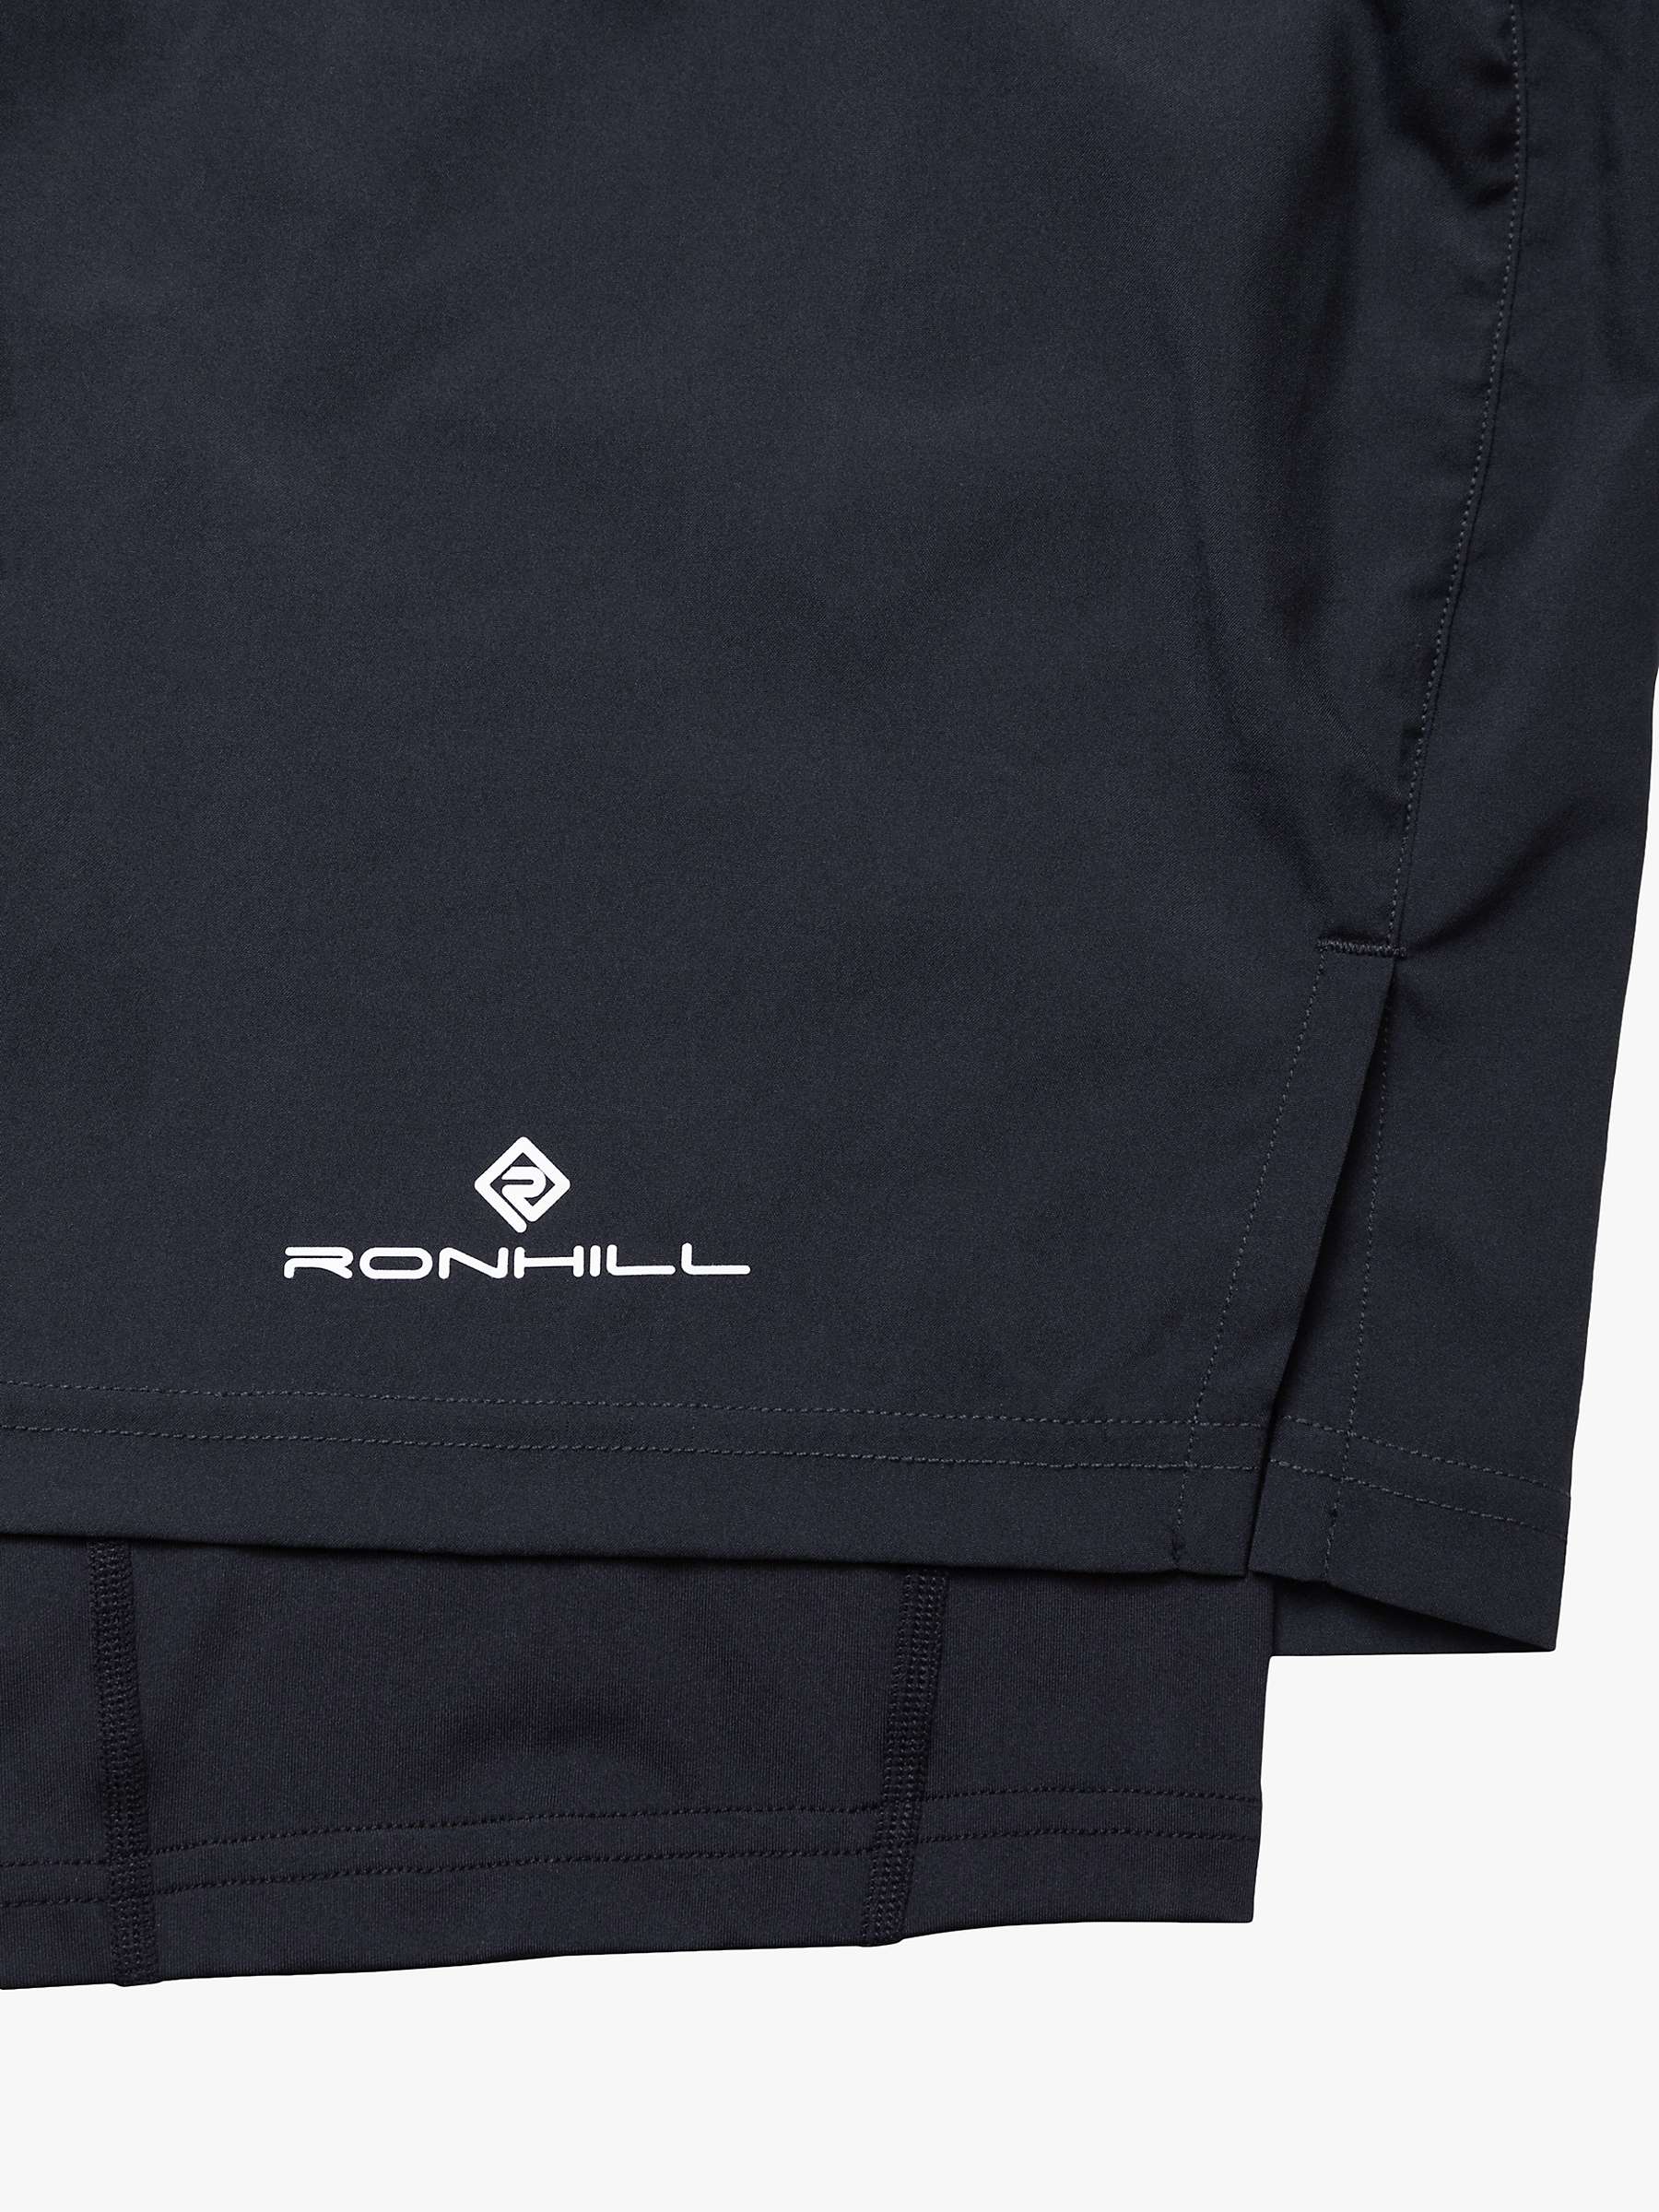 Buy Ronhill Two-In-One Shorts, Black Online at johnlewis.com